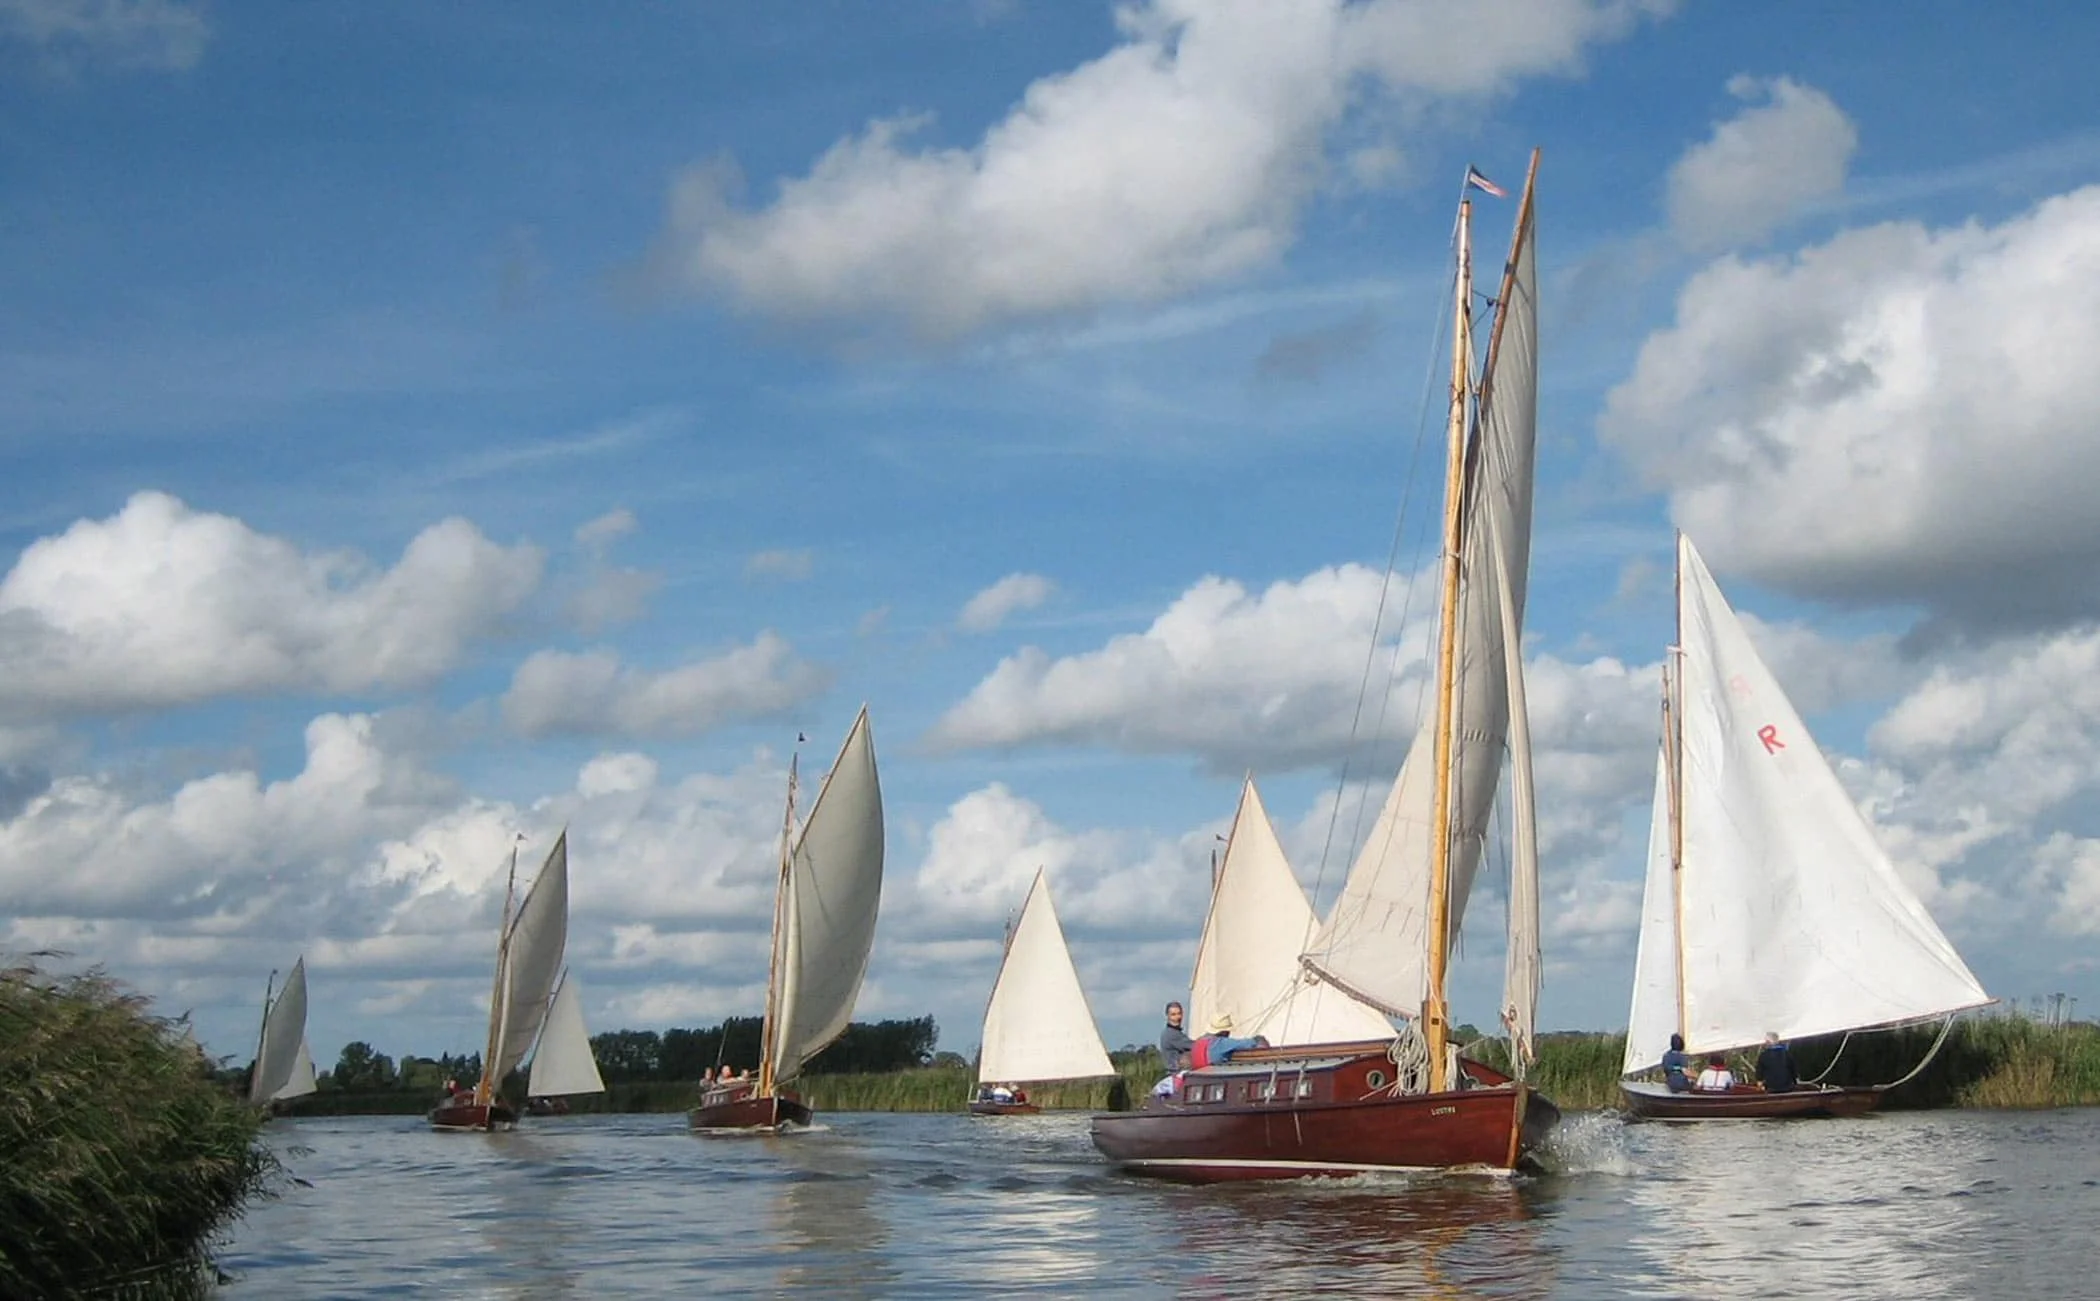 Fleet of traditional wooden Norfolk Broads sailing yachts